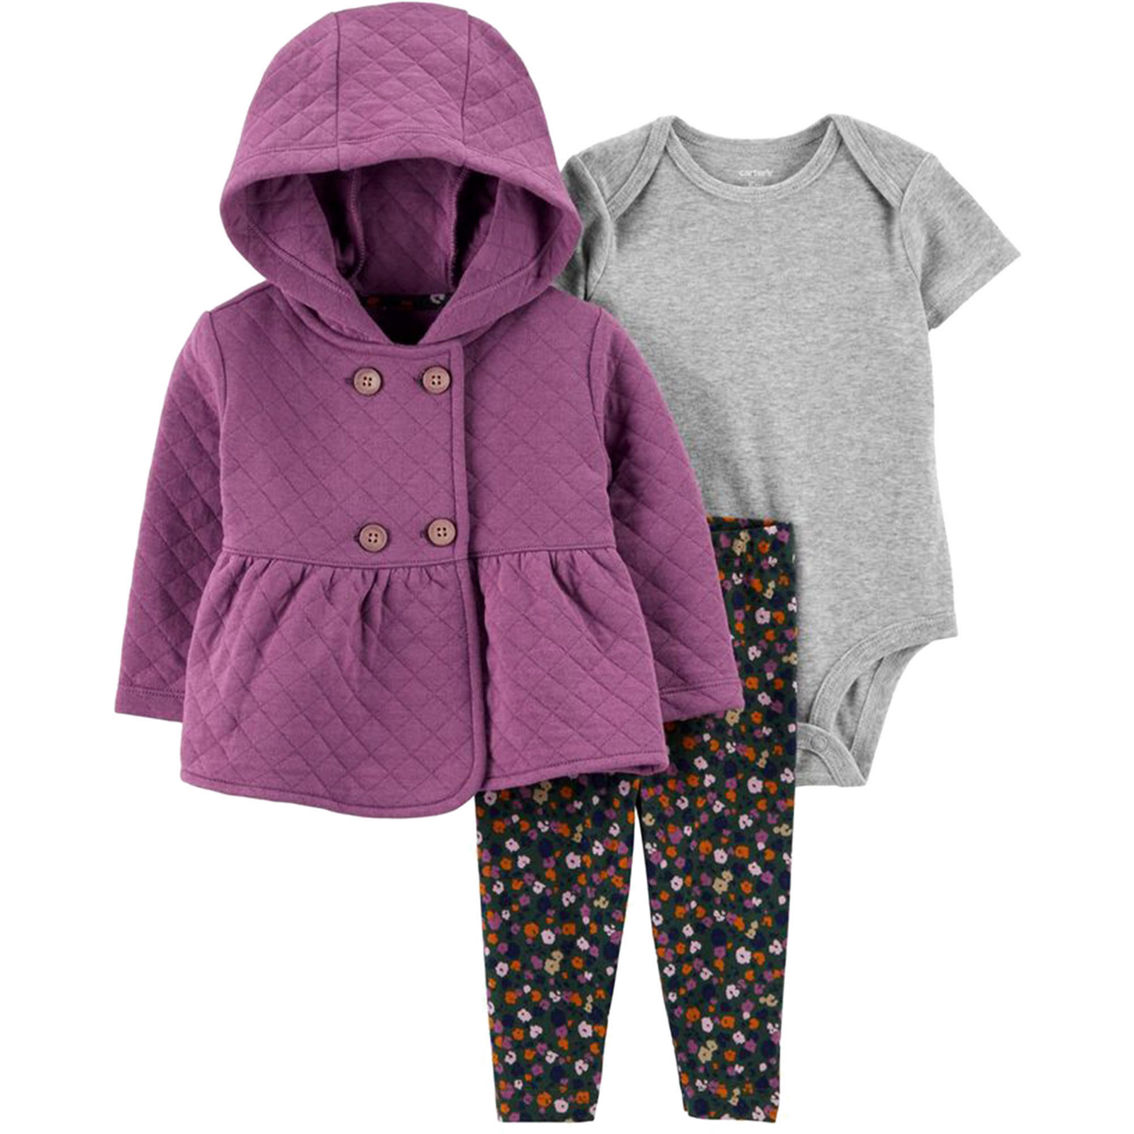 Carter's Infant Girls Purple Quilted Cardigan, Bodysuit and Pants 3 pc. Set